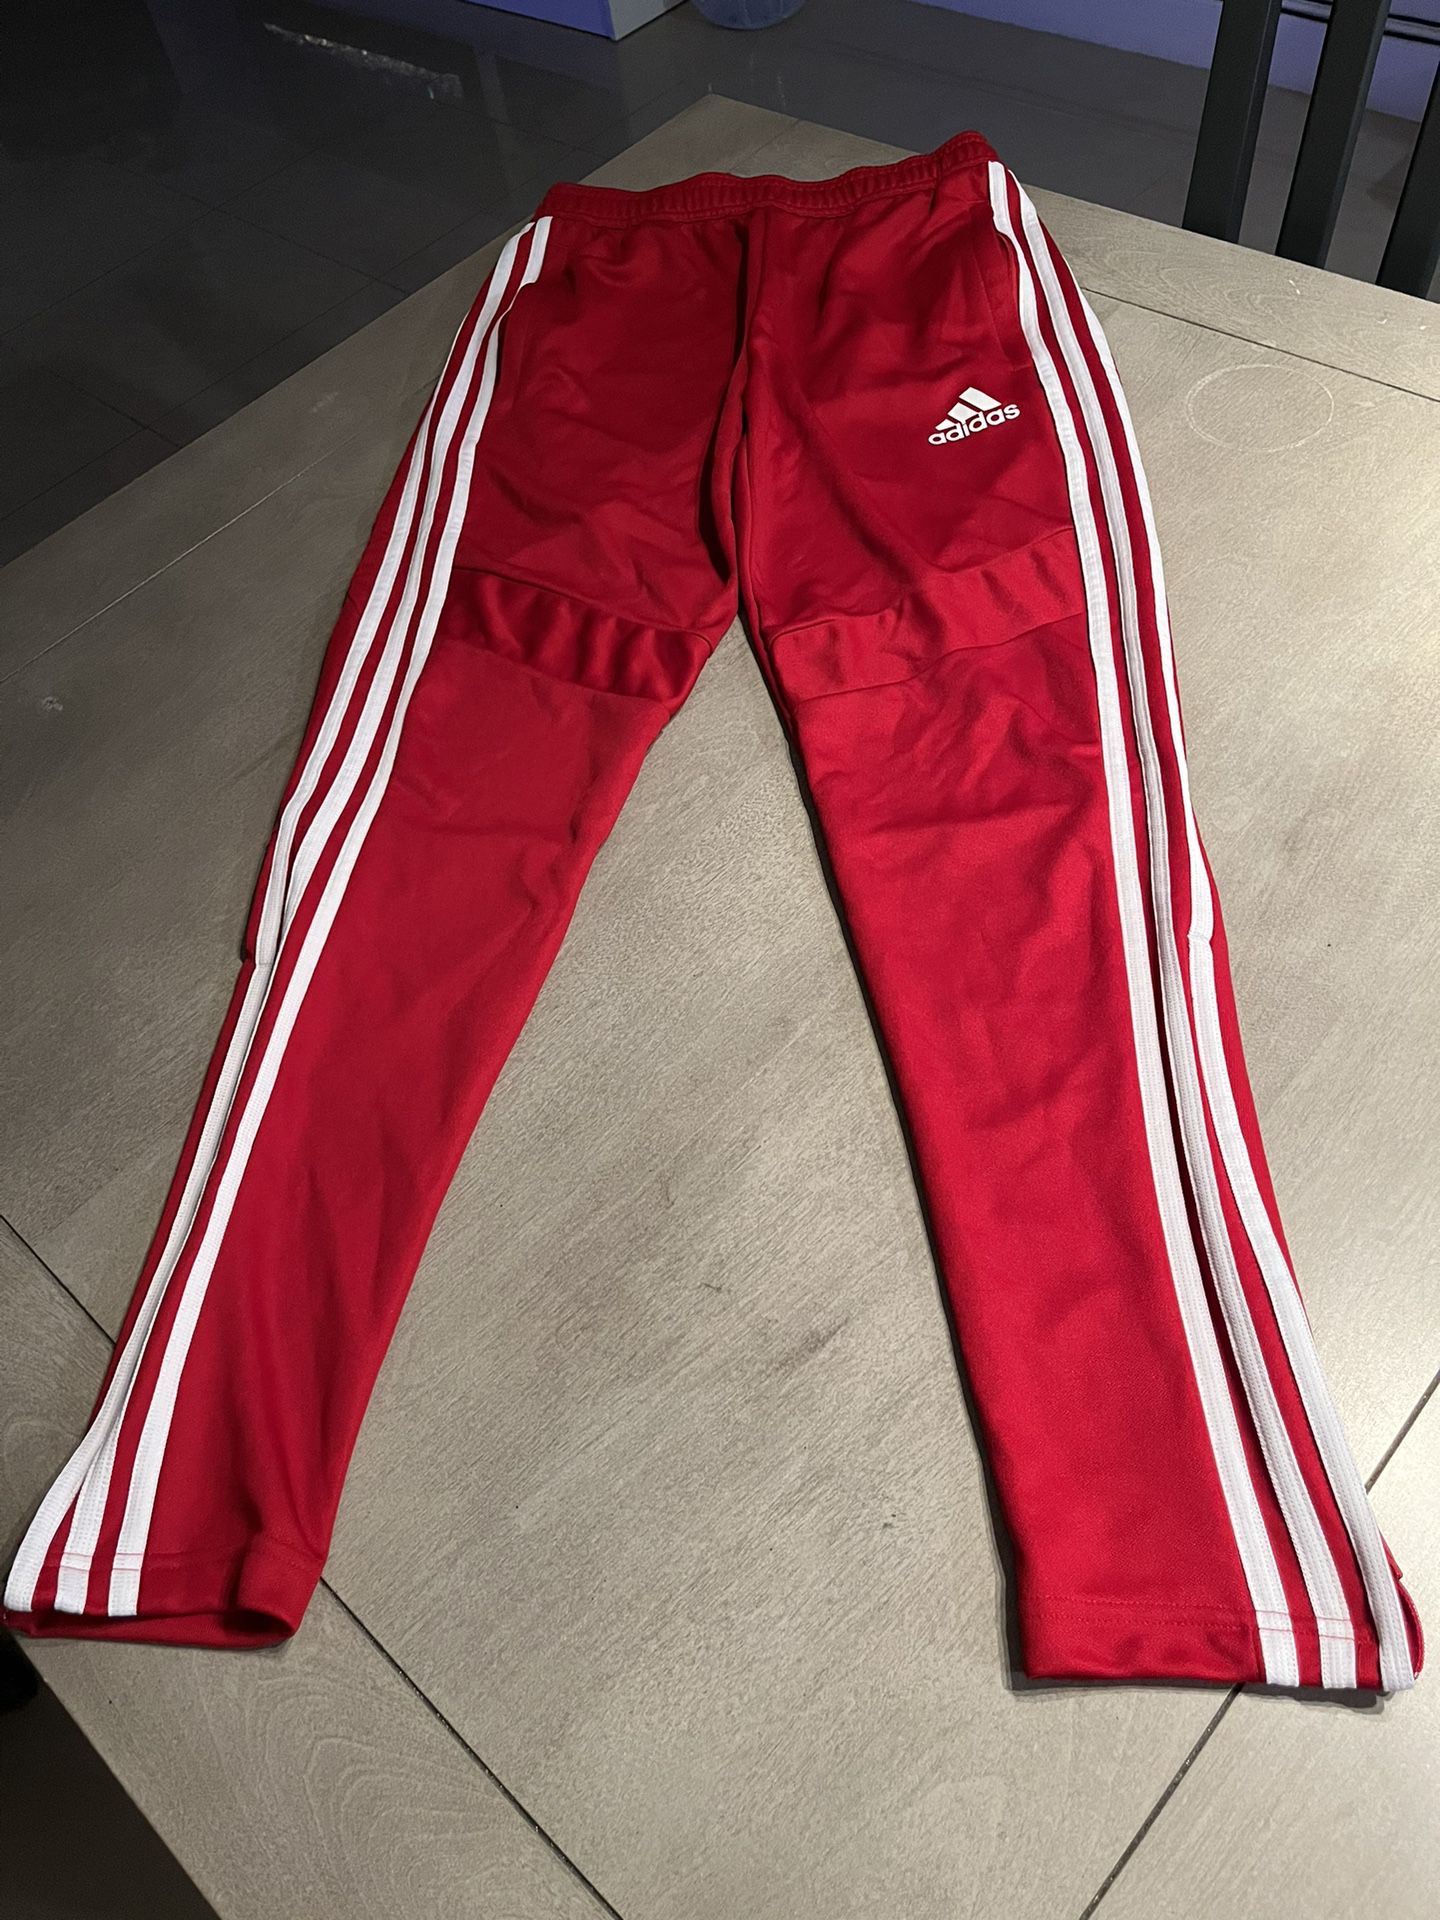 Small Size Adida Pants In Excellent Condition $25 